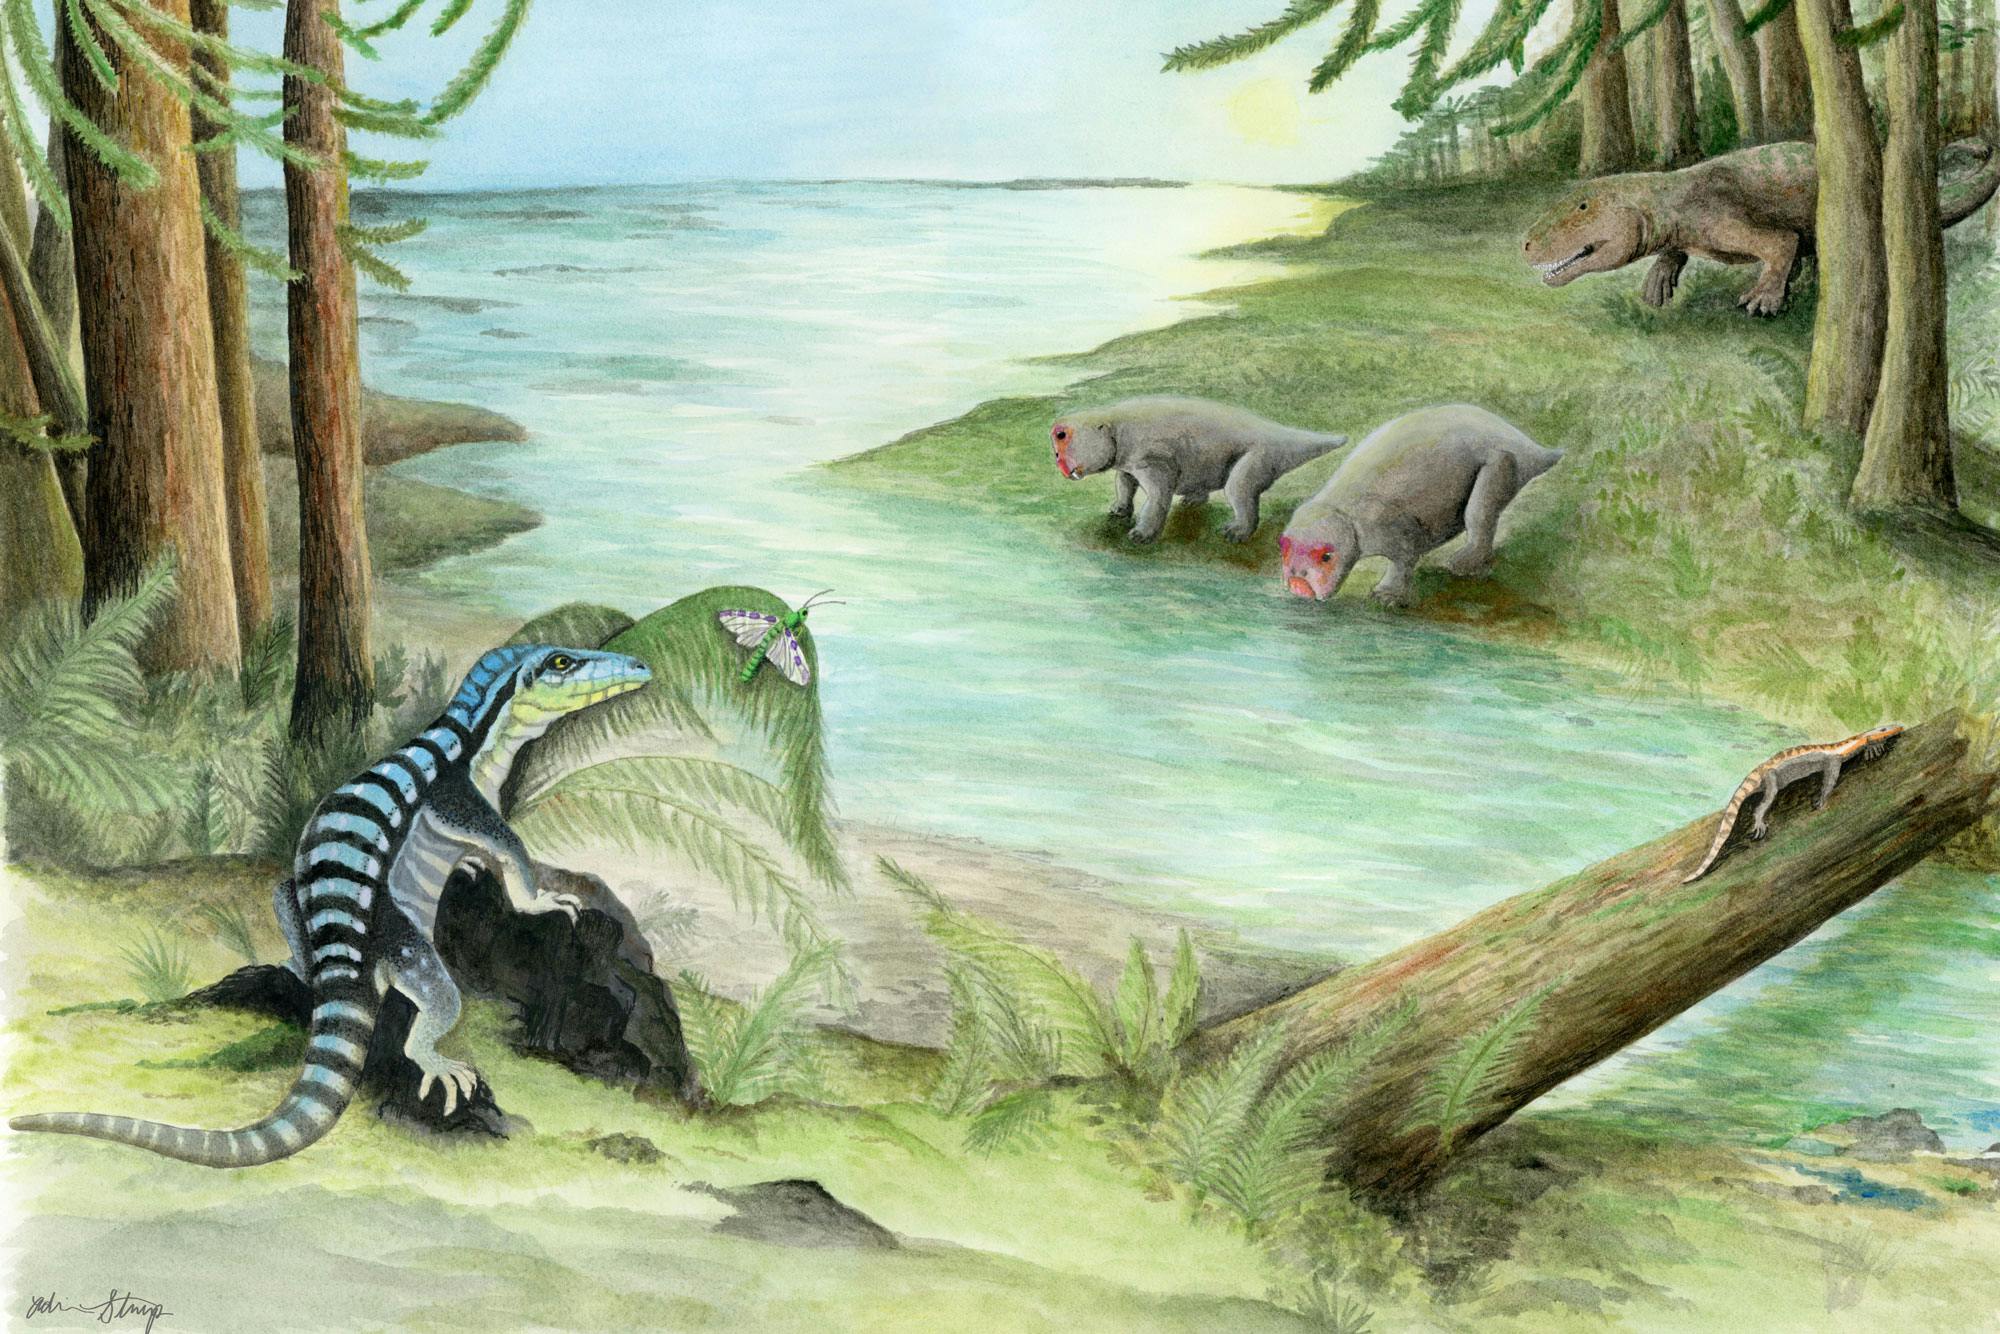 Illustration of a forest scene, with prehistoric animals on either side of a creek. In the foreground, a black and blue striped lizard-like animal perches on a rock as it appears to hunt a winged insect. A smaller lizard crosses a log over the creek. On the other side, two flat-faced, pig-sized animals approach the water’s edge, and a dinosaur creeps in the background.